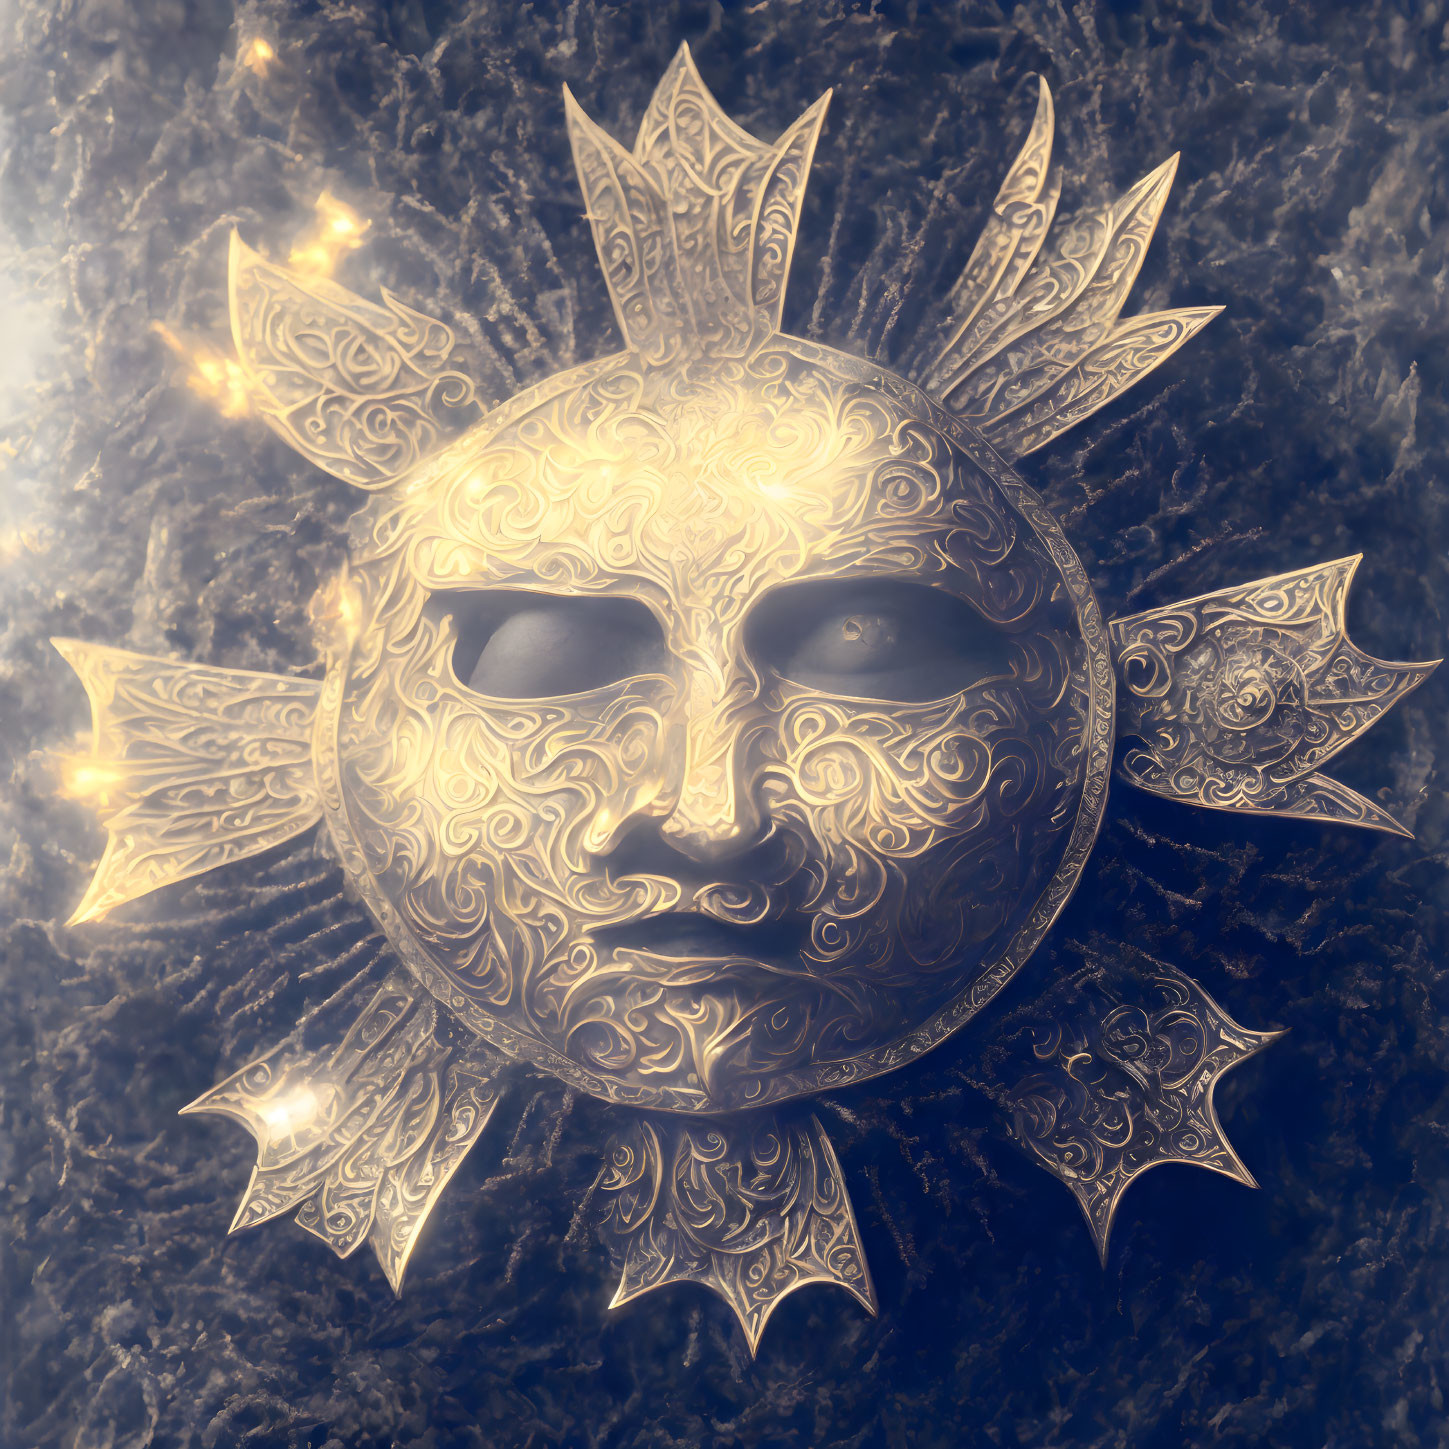 Sun with Human-like Face and Intricate Patterns on Textured Background